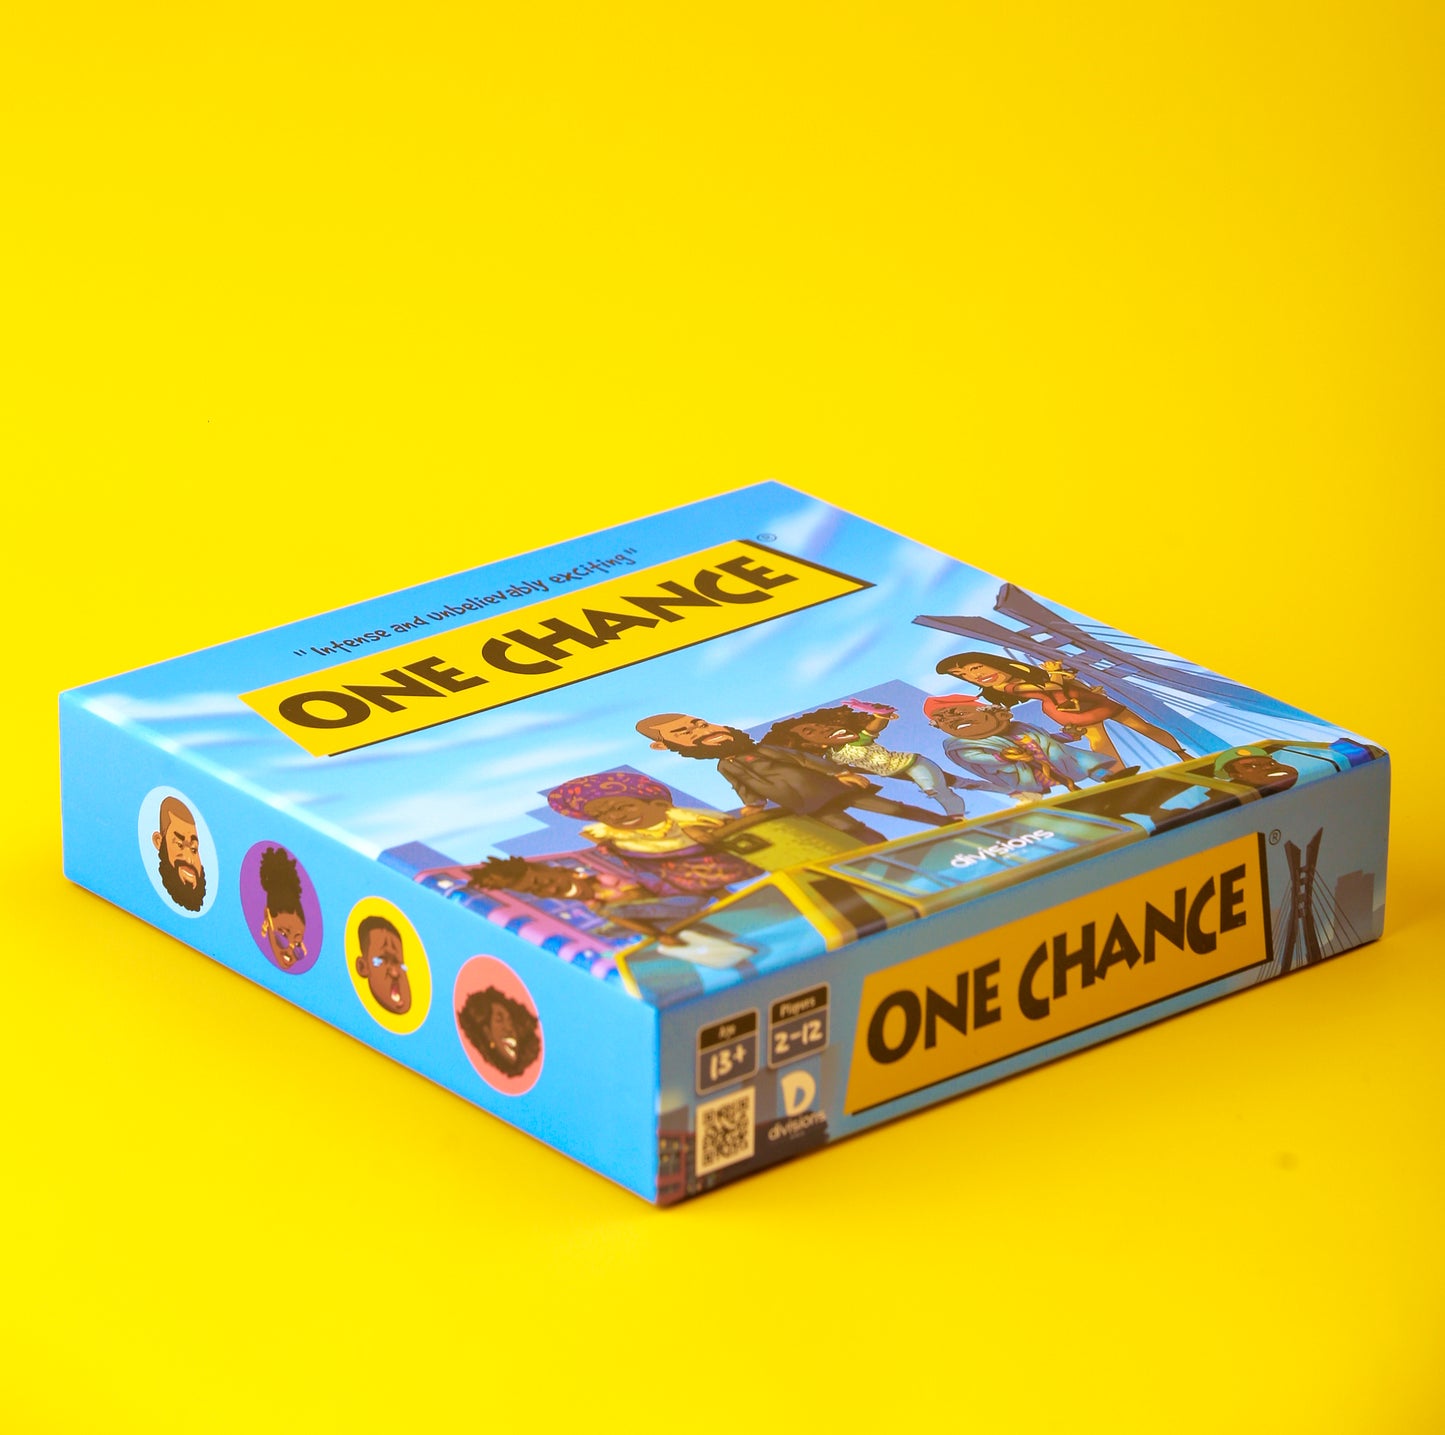 One Chance Game - Now in stock!